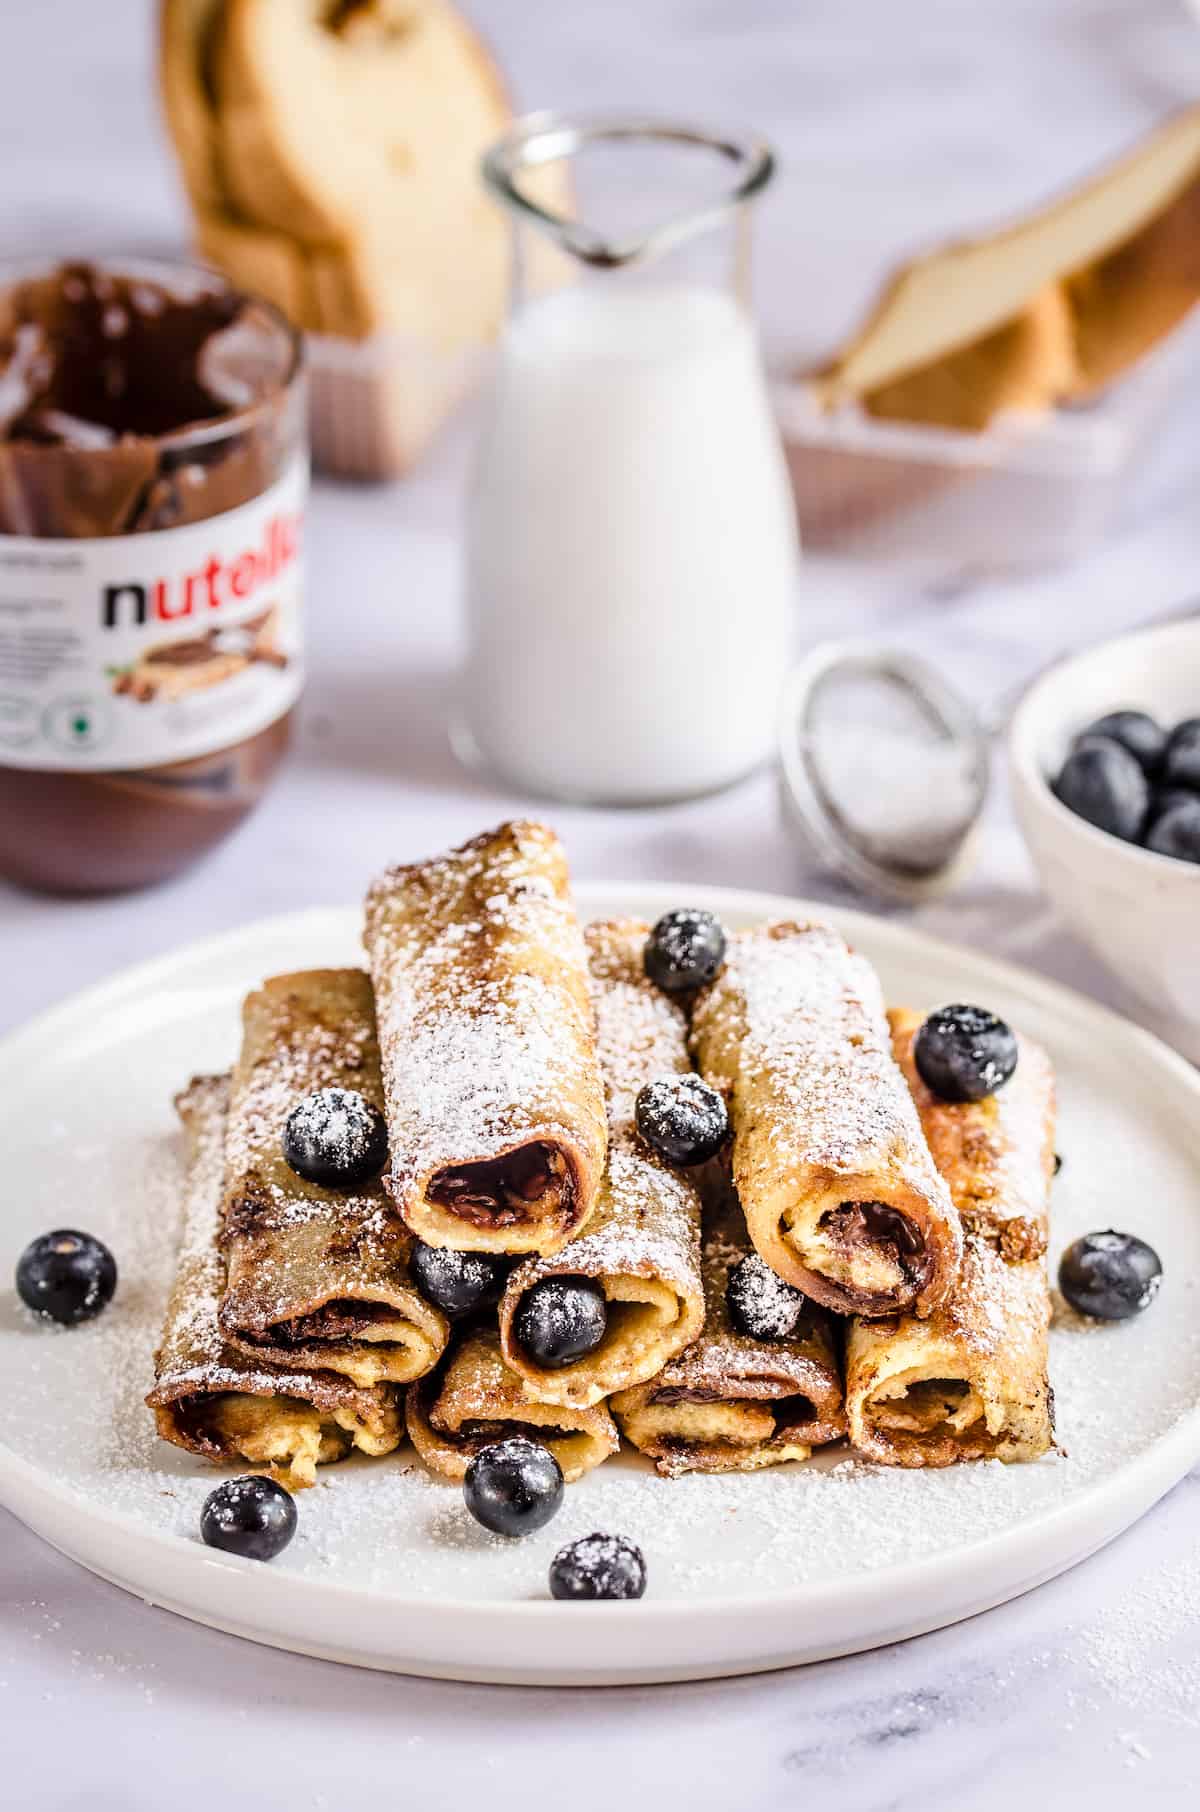 A plate full of Nutella roll-ups with a glass of milk, a bottle of Nutella and a few slices of bread in the background